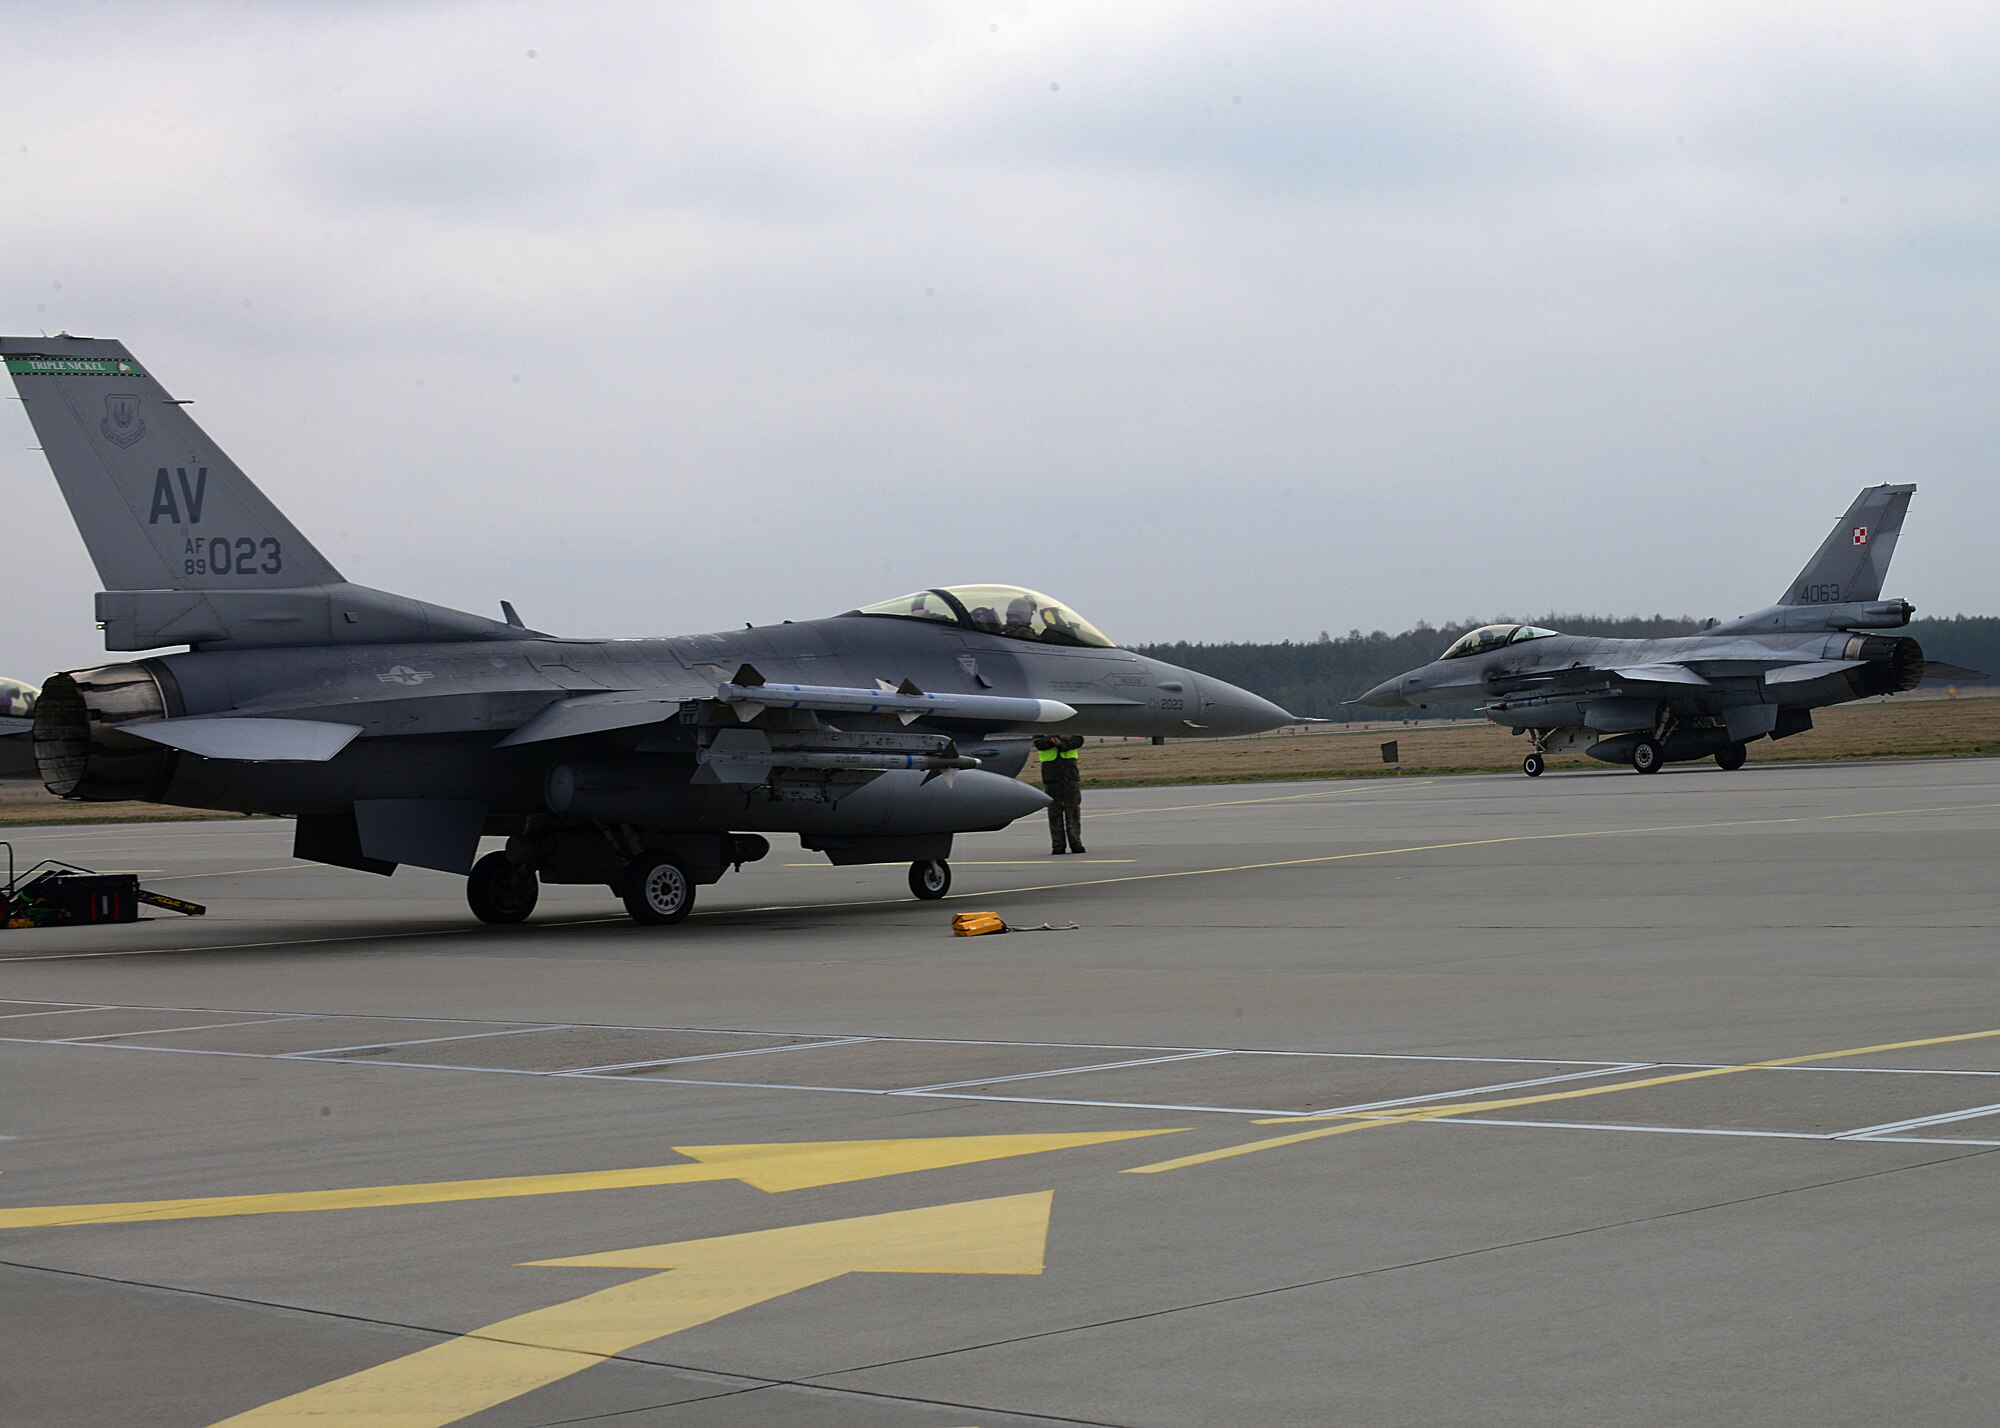 (From right) A Polish F-16 Fighting Falcon taxis past a 555th Fighter Squadron F-16 before a training mission, March 18, 2014, at Lask Air Base, Poland. The aerial training exercises a pilot’s ability to operate across a range of military operations with precise full-spectrum capabilities. (U.S. Air Force photo/Airman 1st Class Ryan Conroy) 

